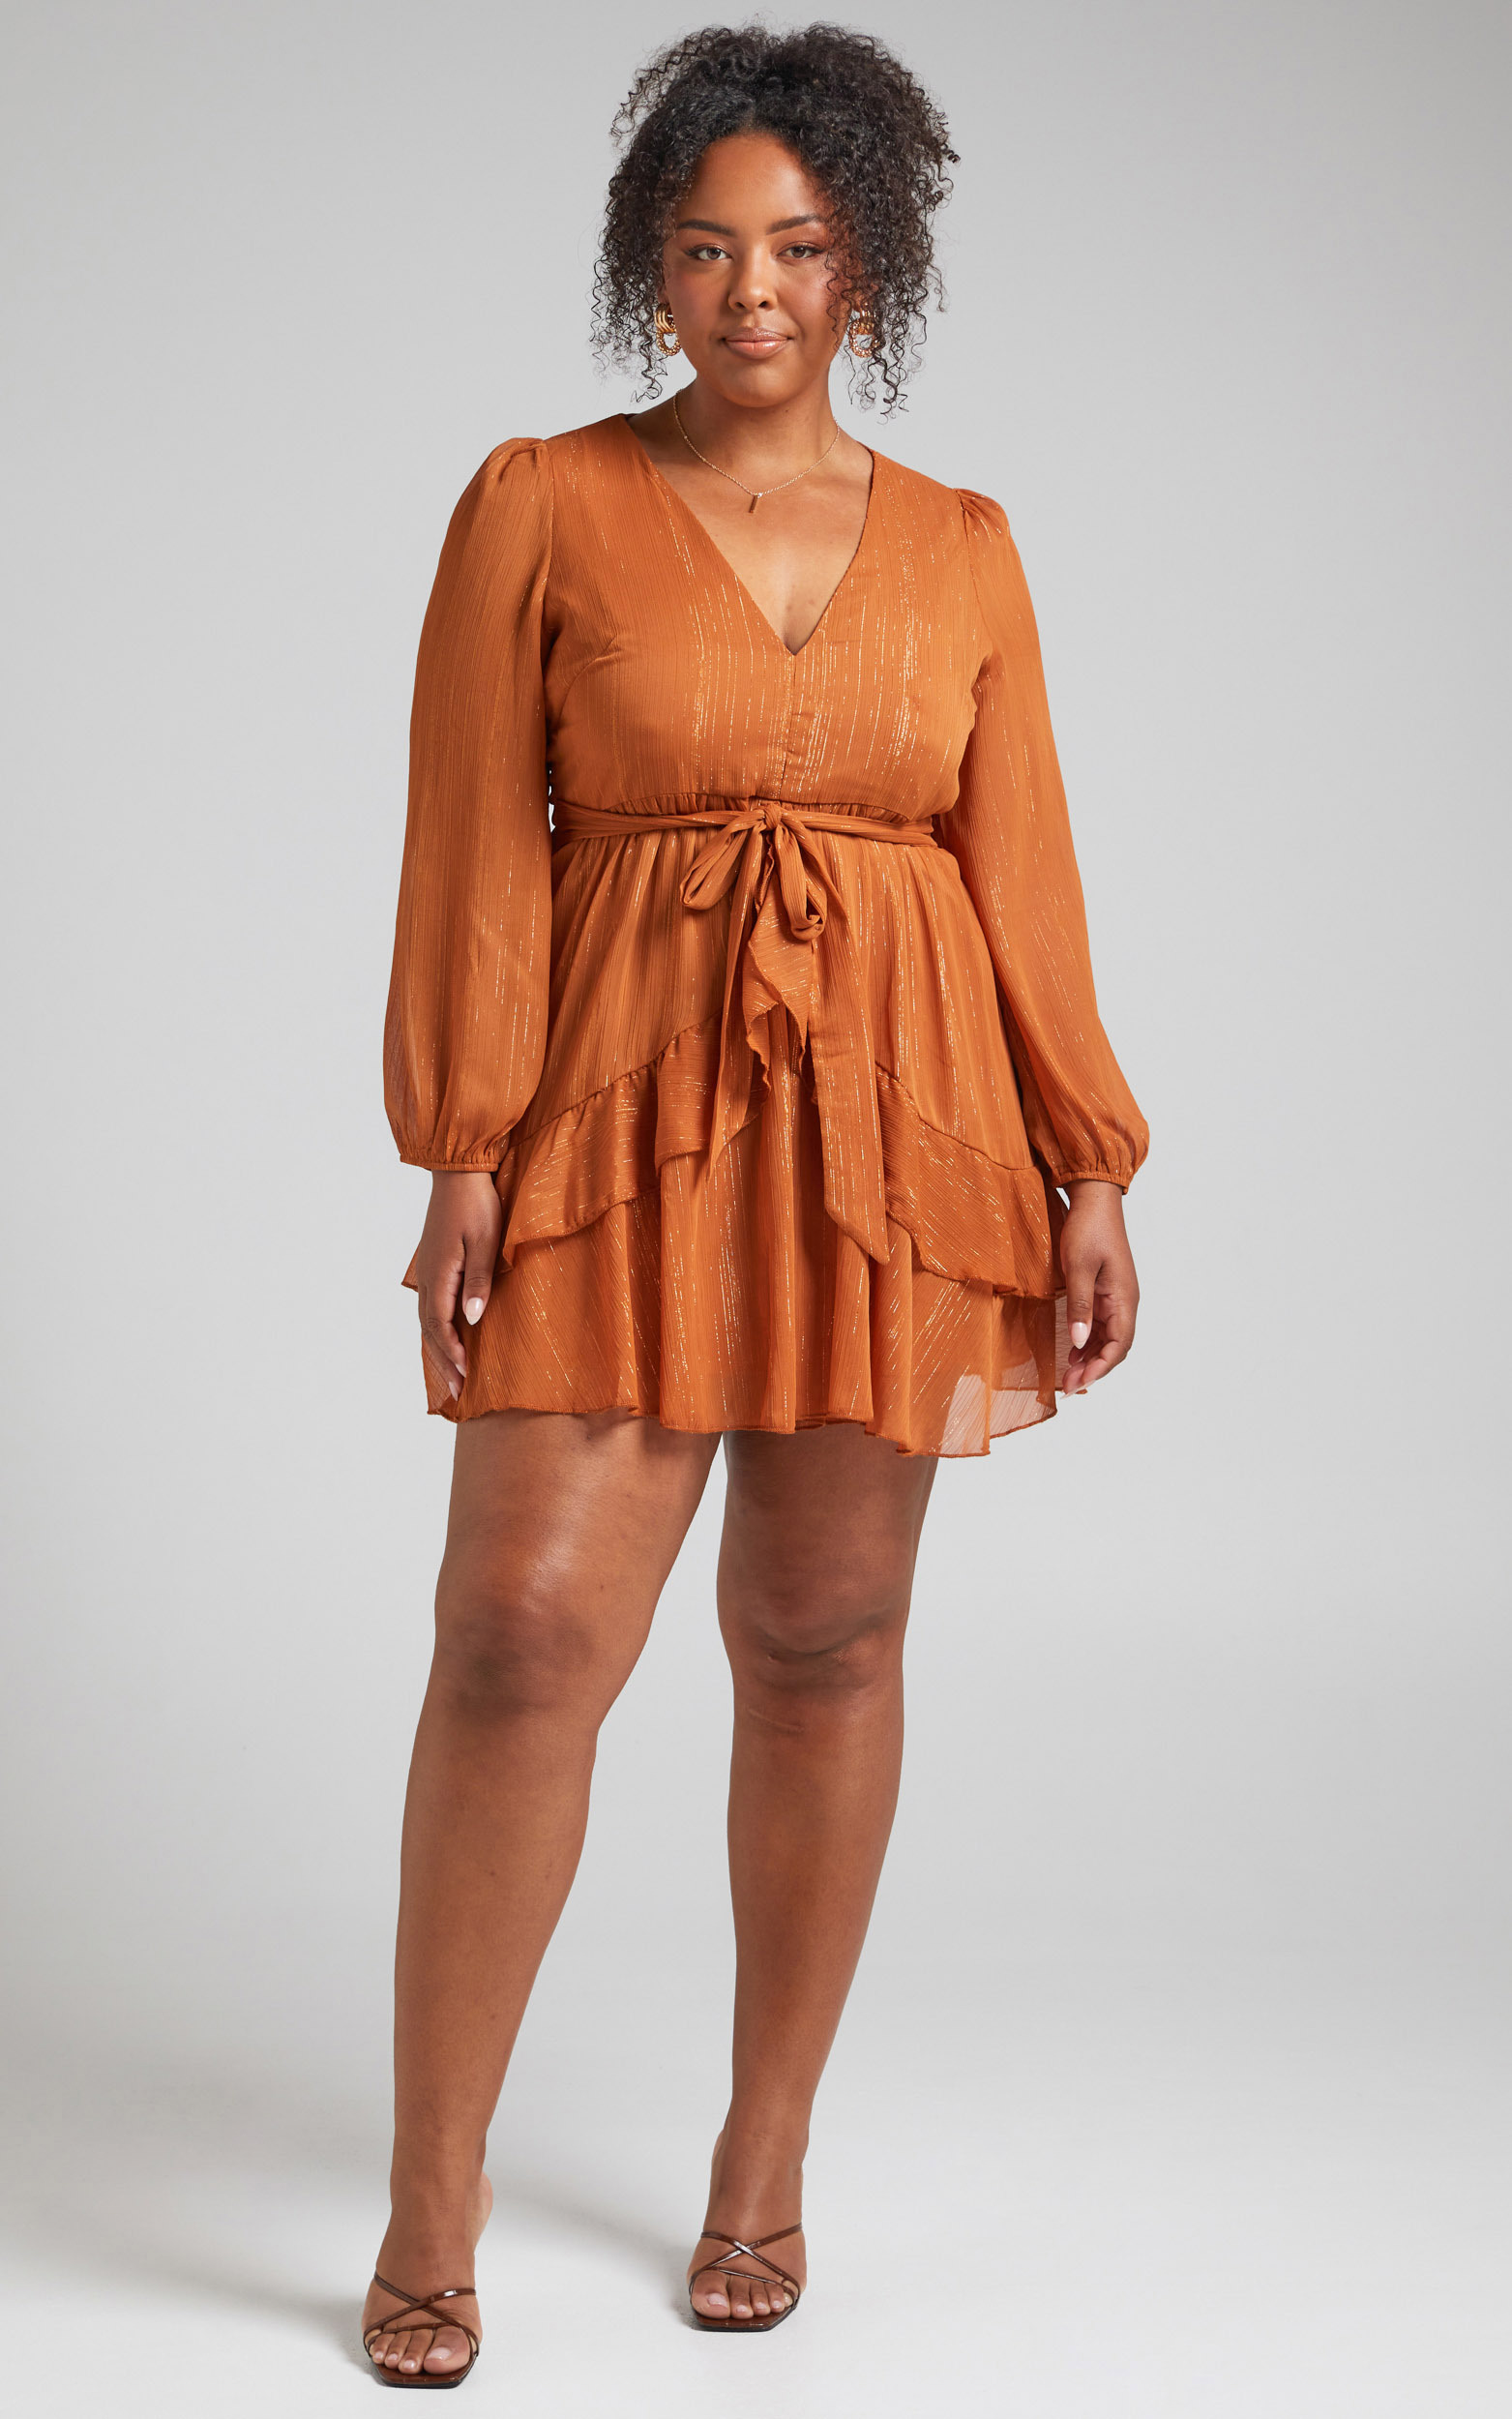 Eyes That Know Me Long Sleeve Ruffle Mini Dress in Rust - 06, BRN1, hi-res image number null